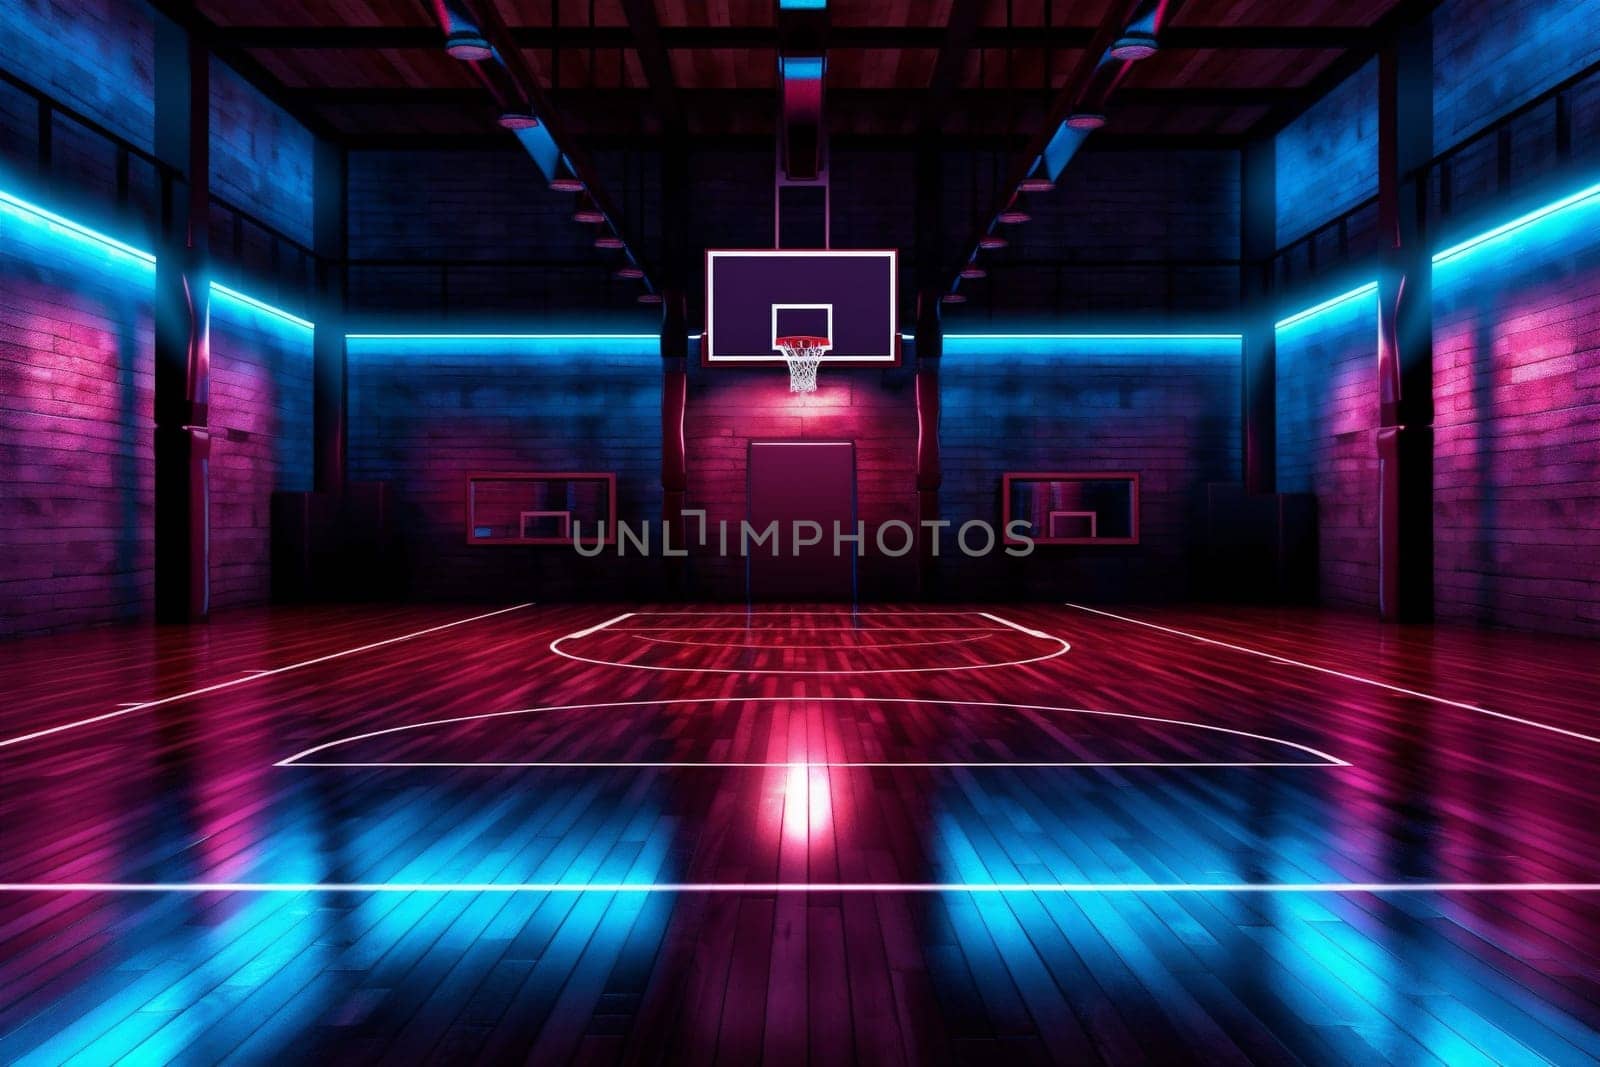 score game basketball corridor background wall three-dimensional hoop net floor space arena match interior light neon hall room empty competition tunnel indoor. Generative AI.